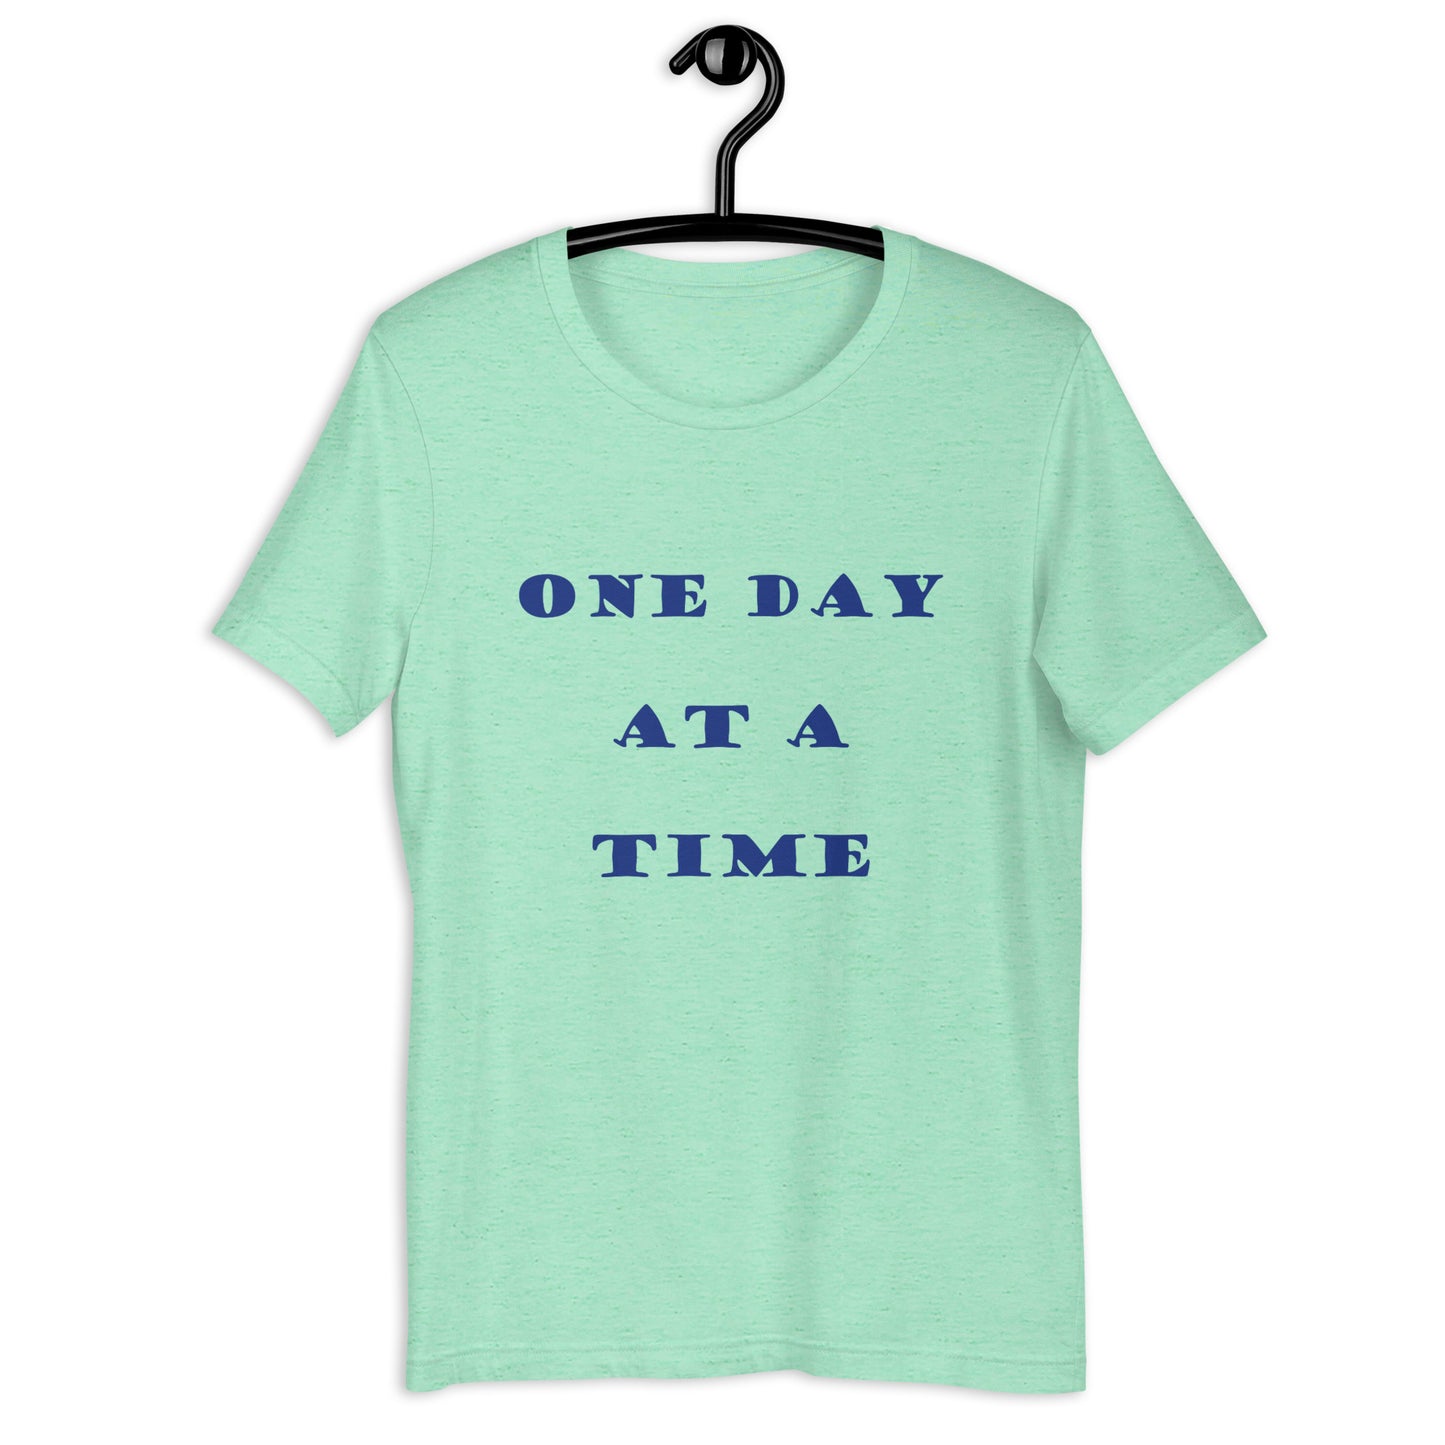 One Day at a Time unisex t-shirt